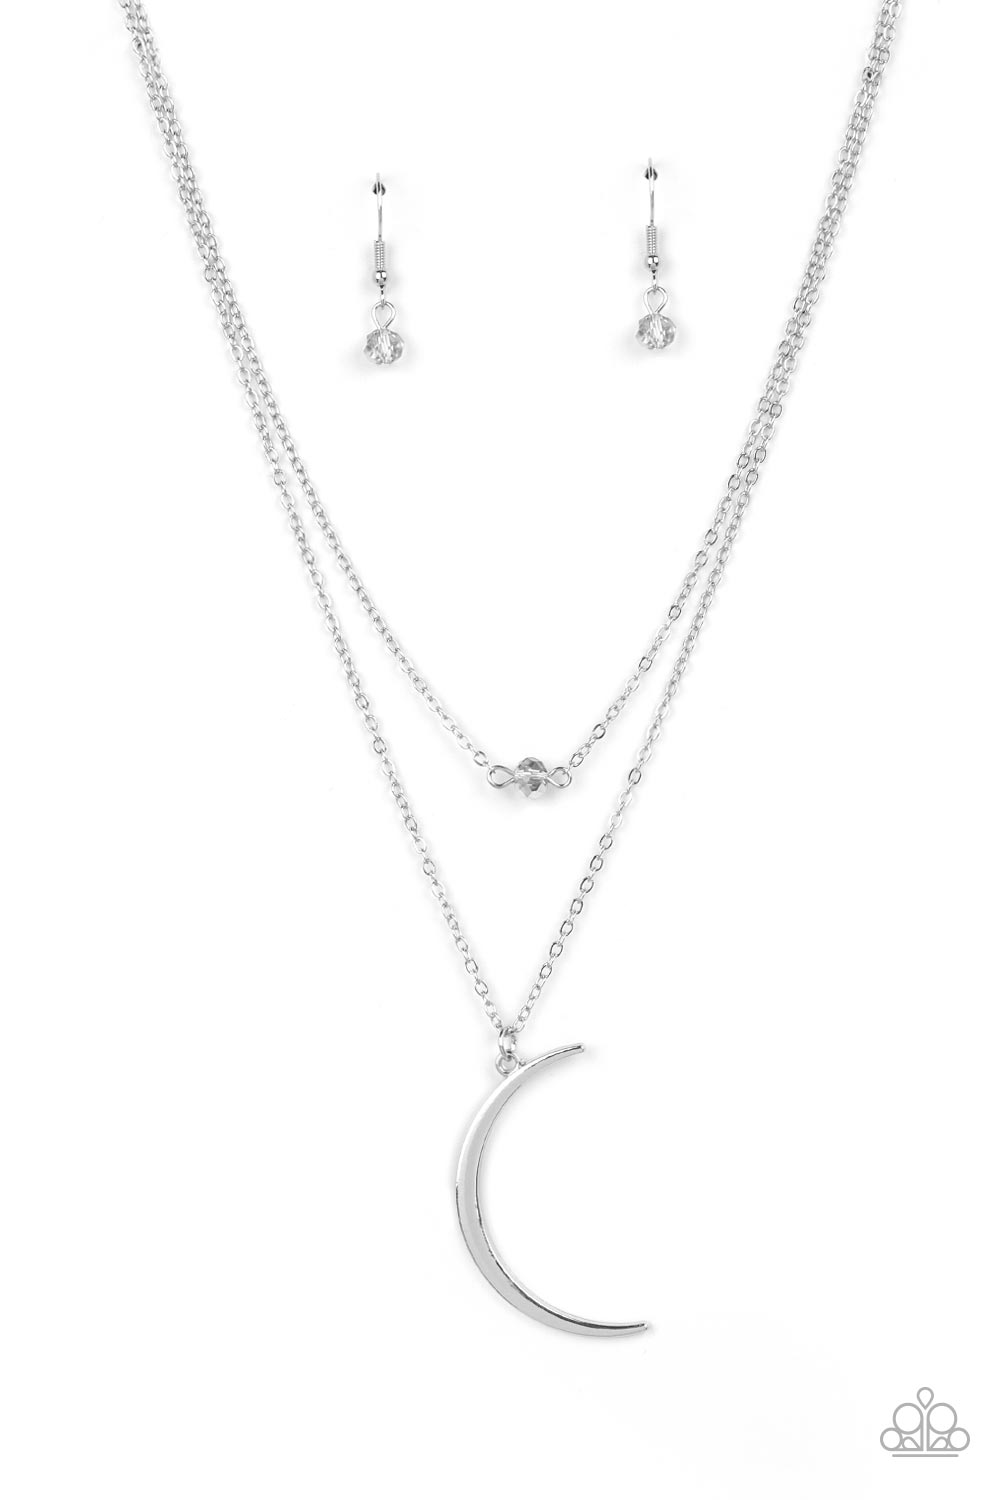 Paparazzi Modern Moonbeam Silver Necklace. Crescent Moon Pendant. Subscribe & Save. 